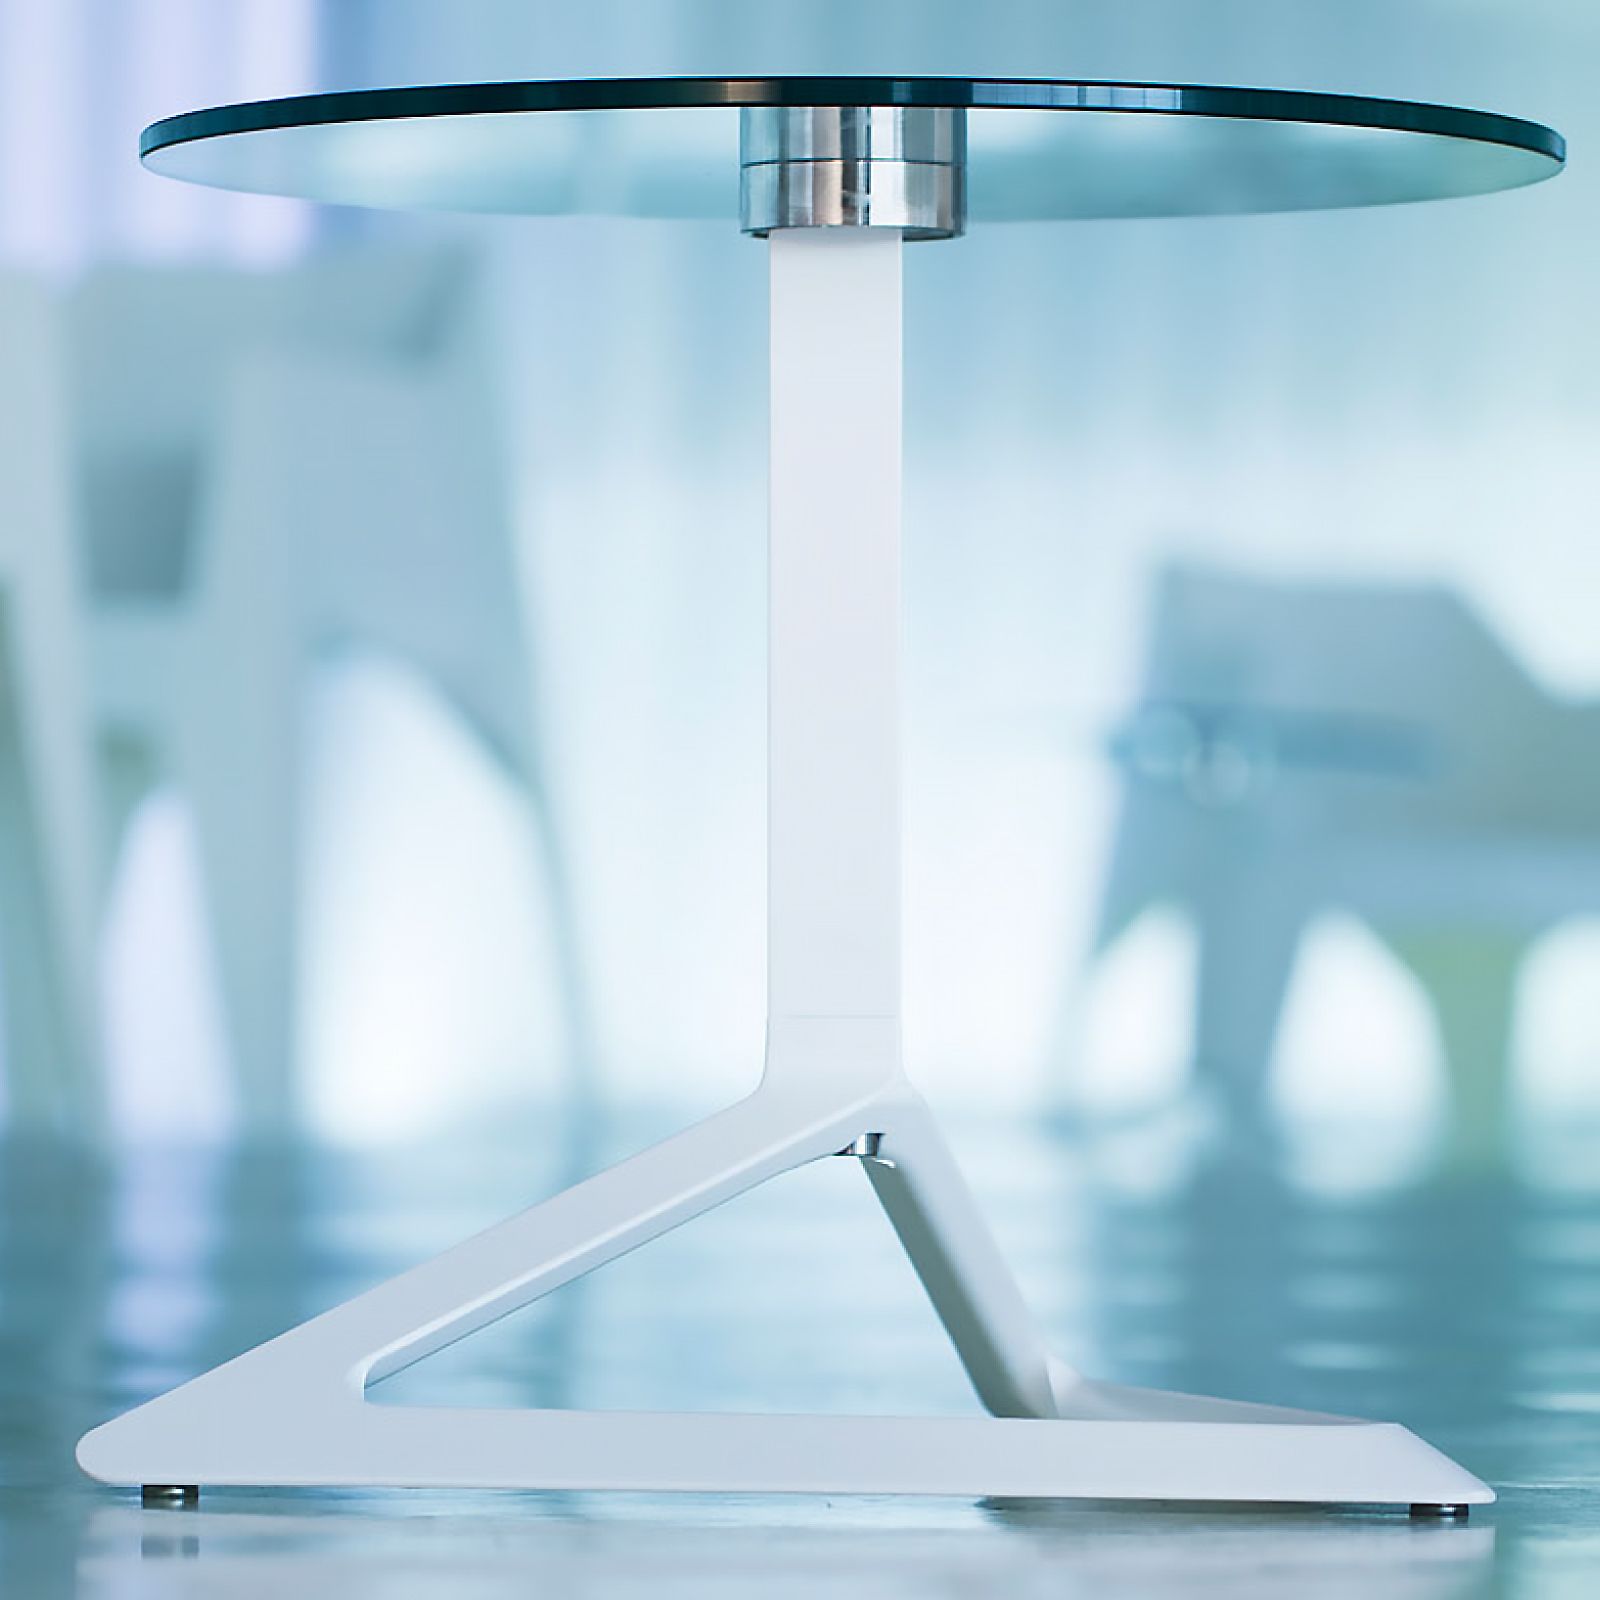 DELTA OCCASIONAL TABLE